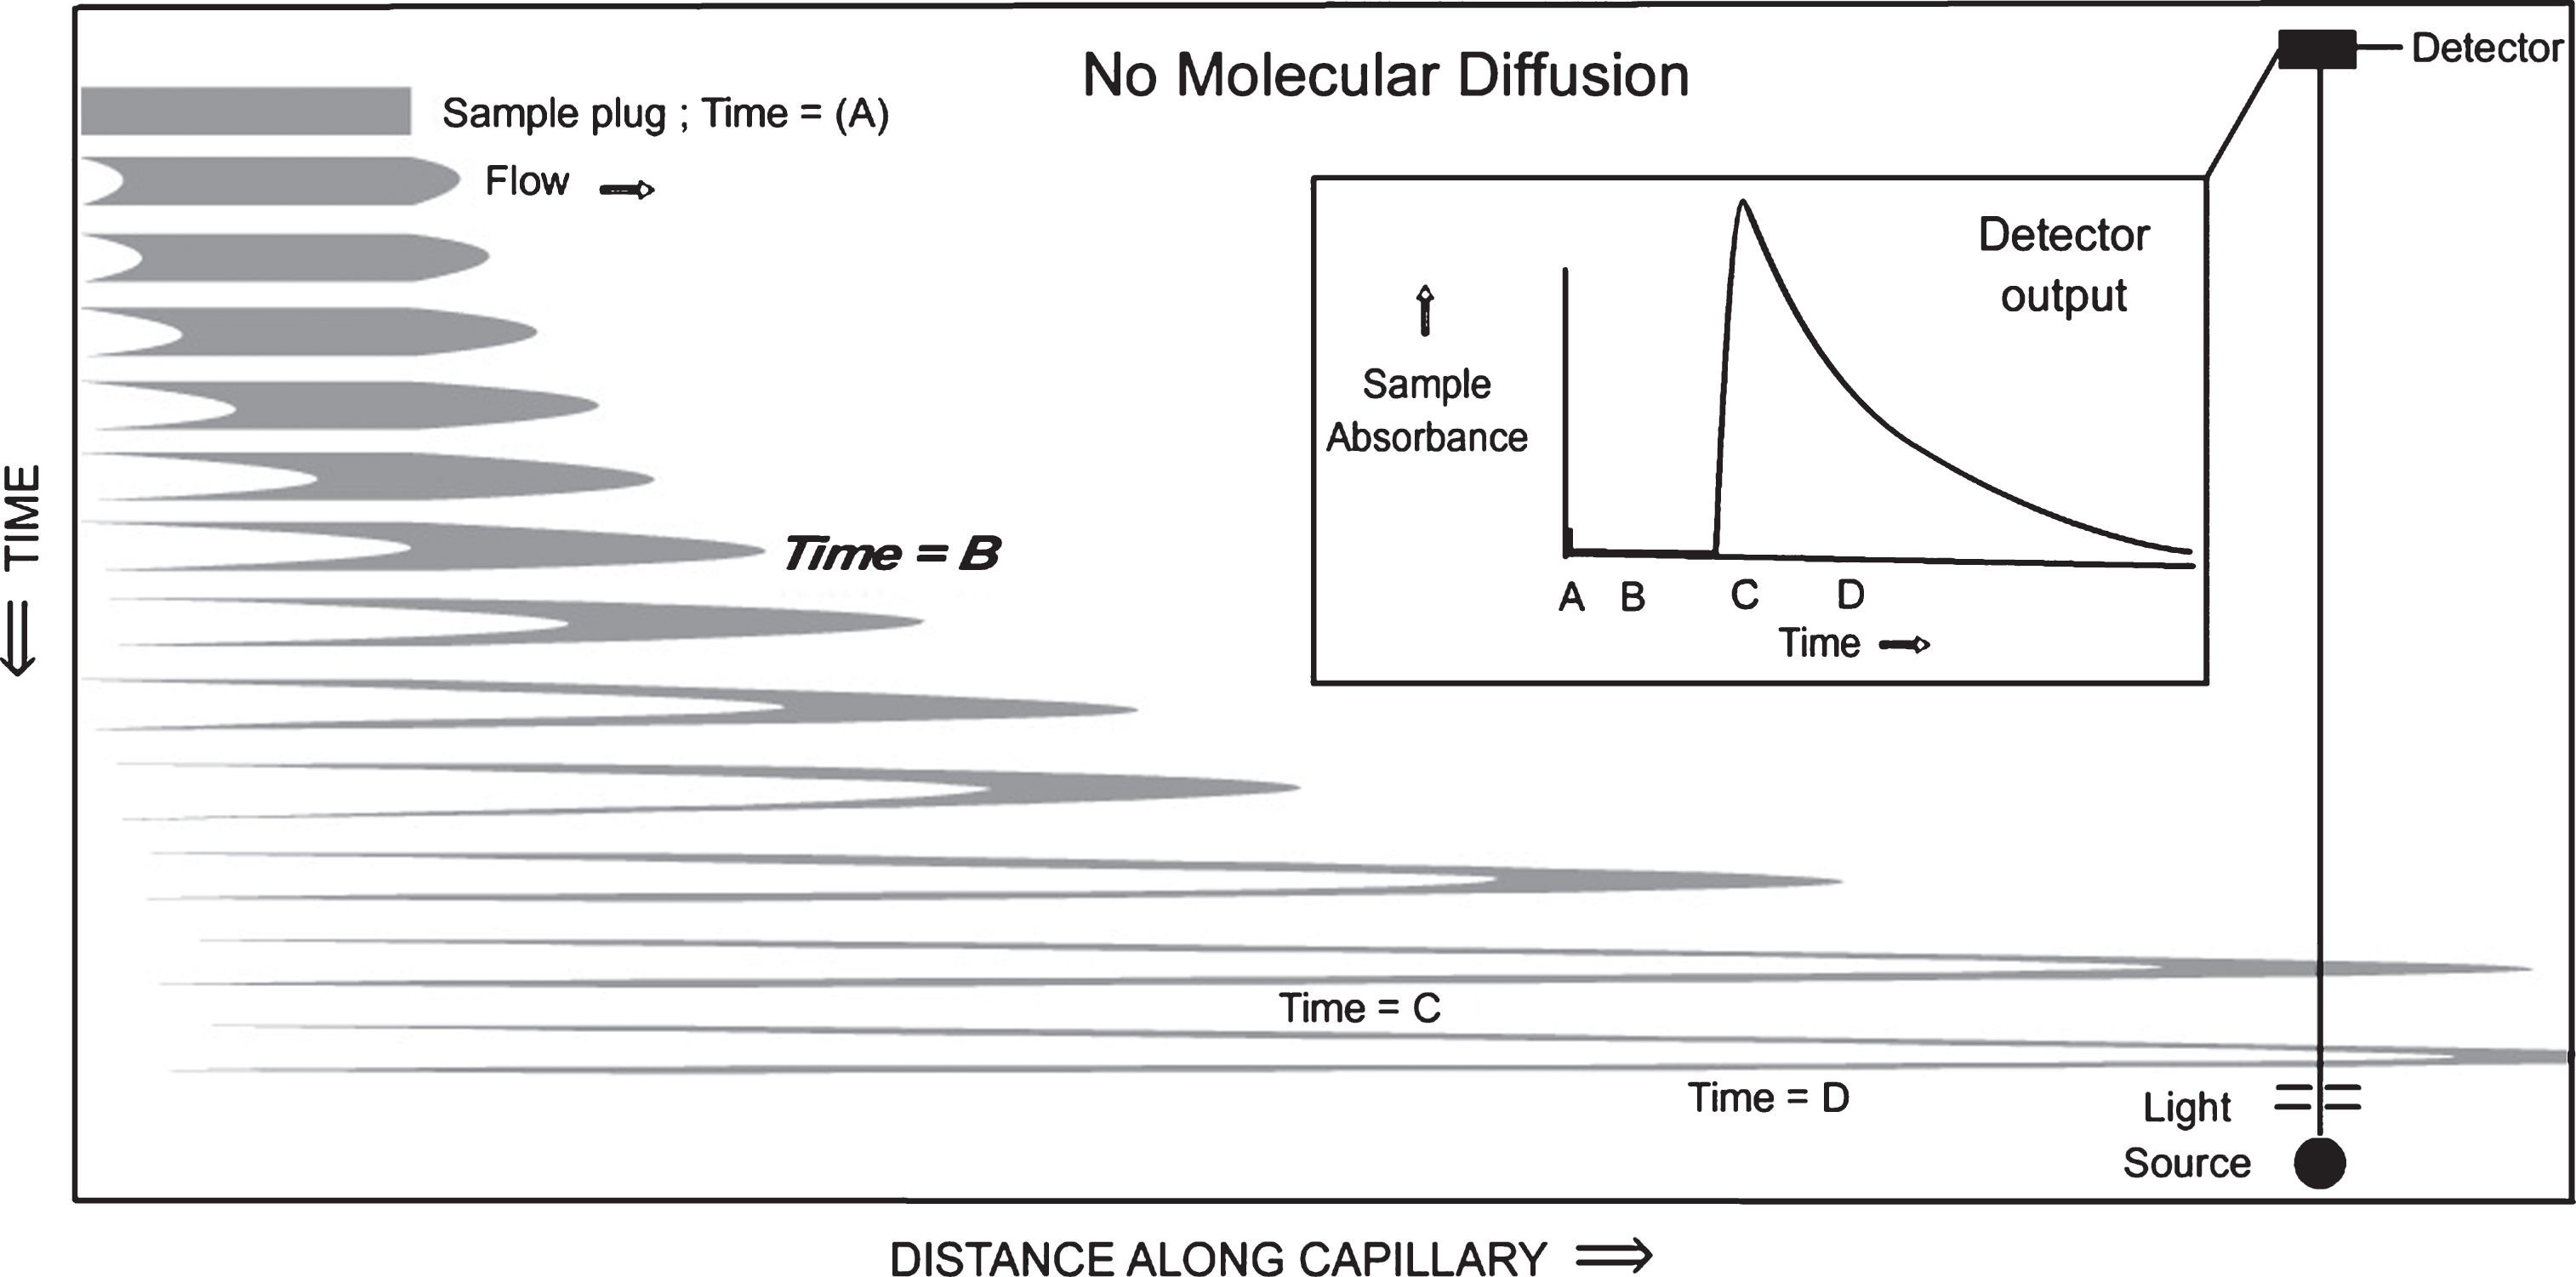 Time-lapse snapshots of an axial cross section of a sample profile travelling down a capillary, distorted by laminar flow. In this figure, it is assumed that there is no diffusion of the sample molecules outside the gray borders.